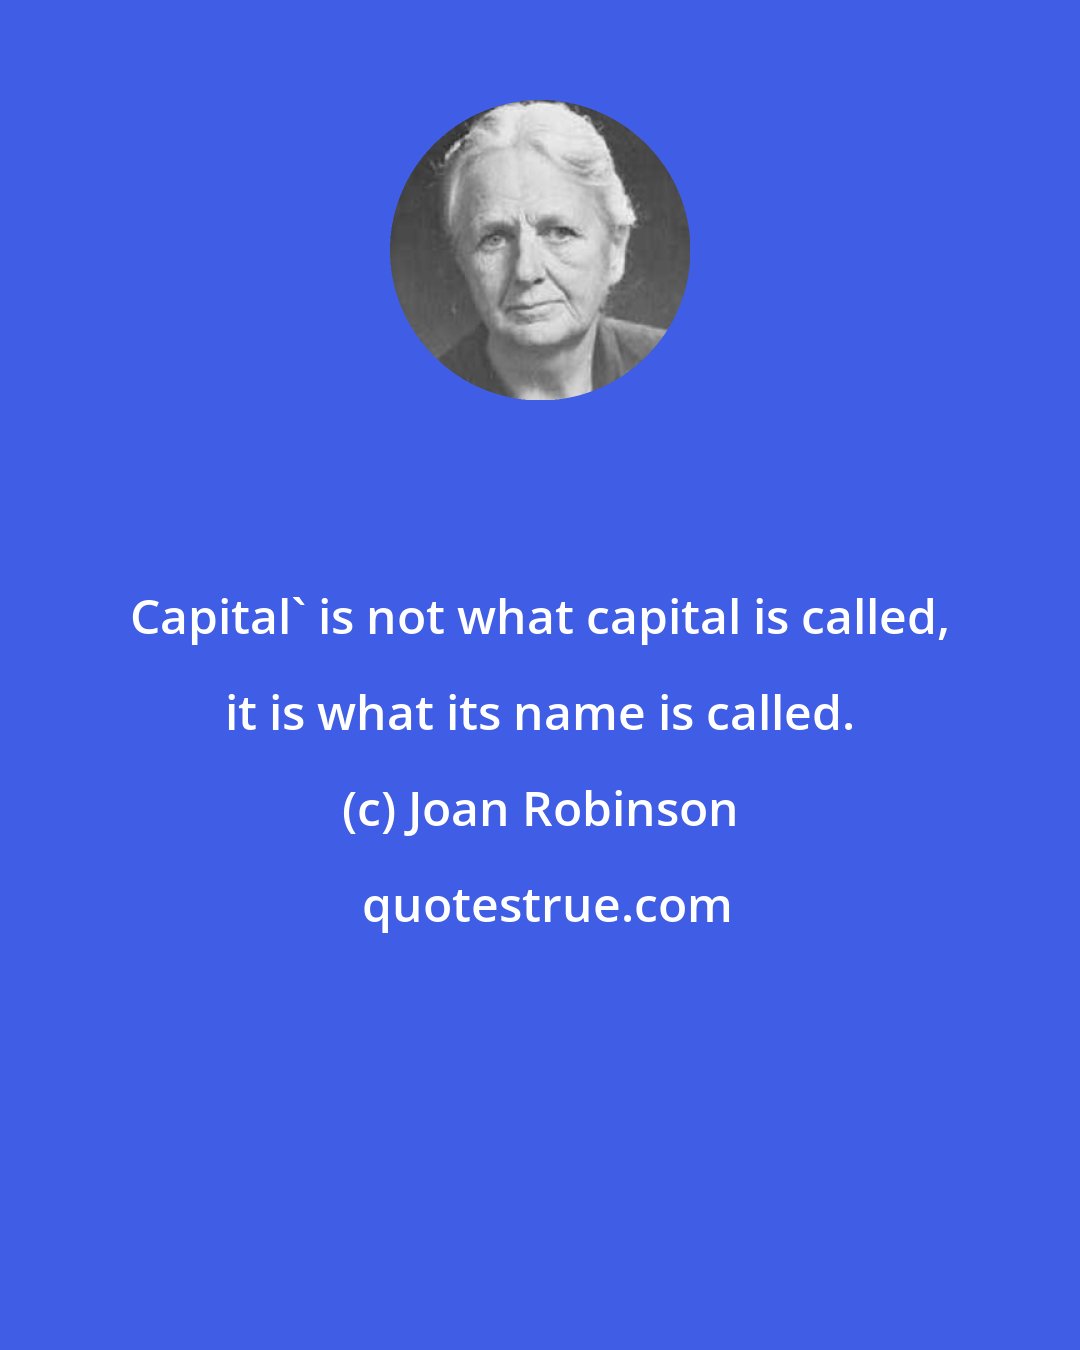 Joan Robinson: Capital' is not what capital is called, it is what its name is called.